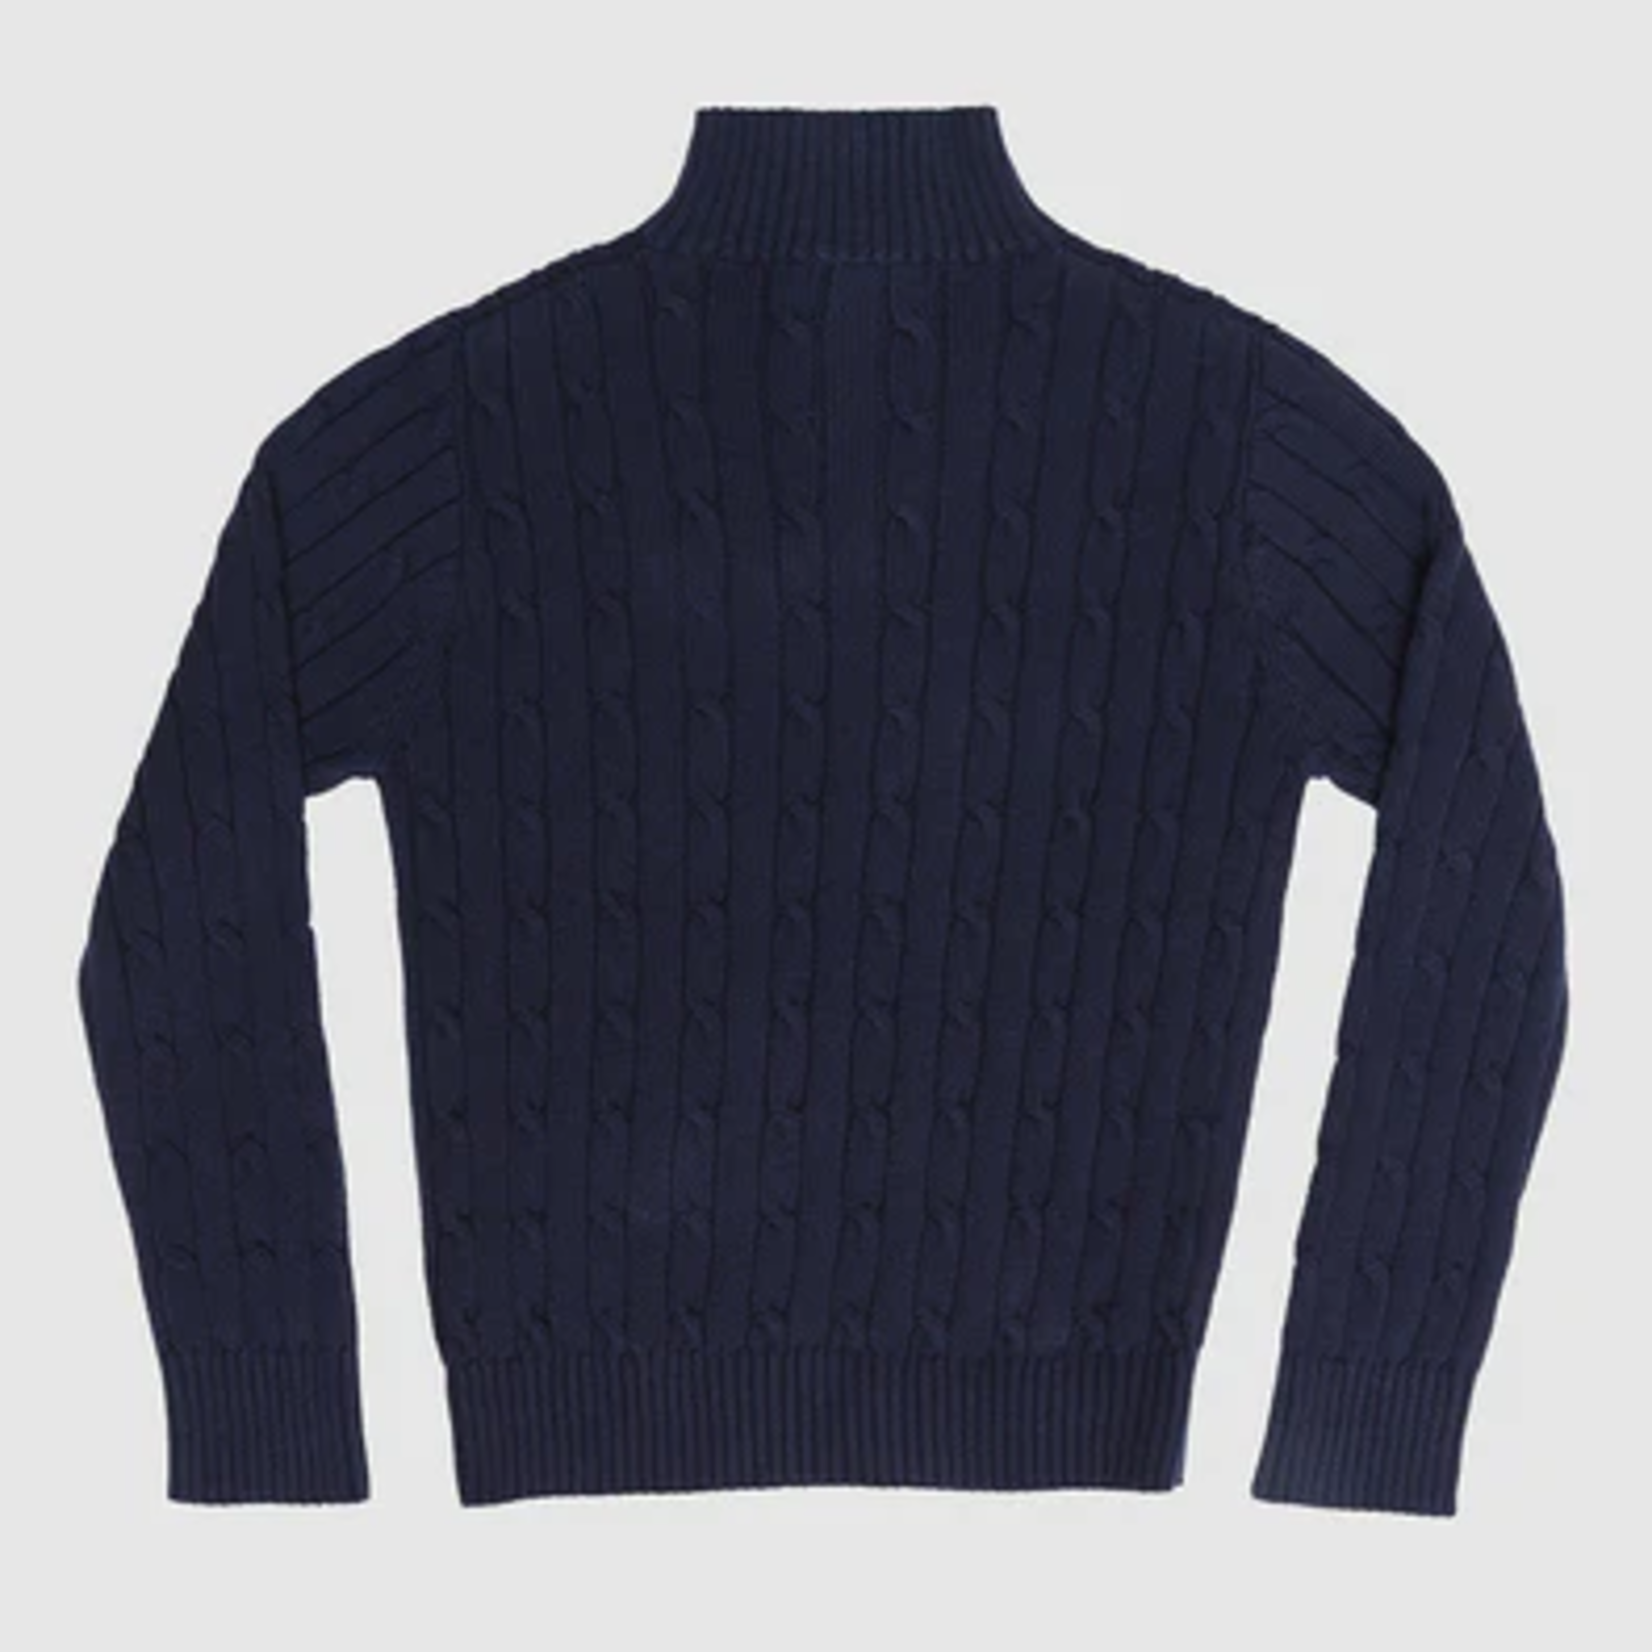 PEDAL Truckee 1/4 Zip Cable Sweater